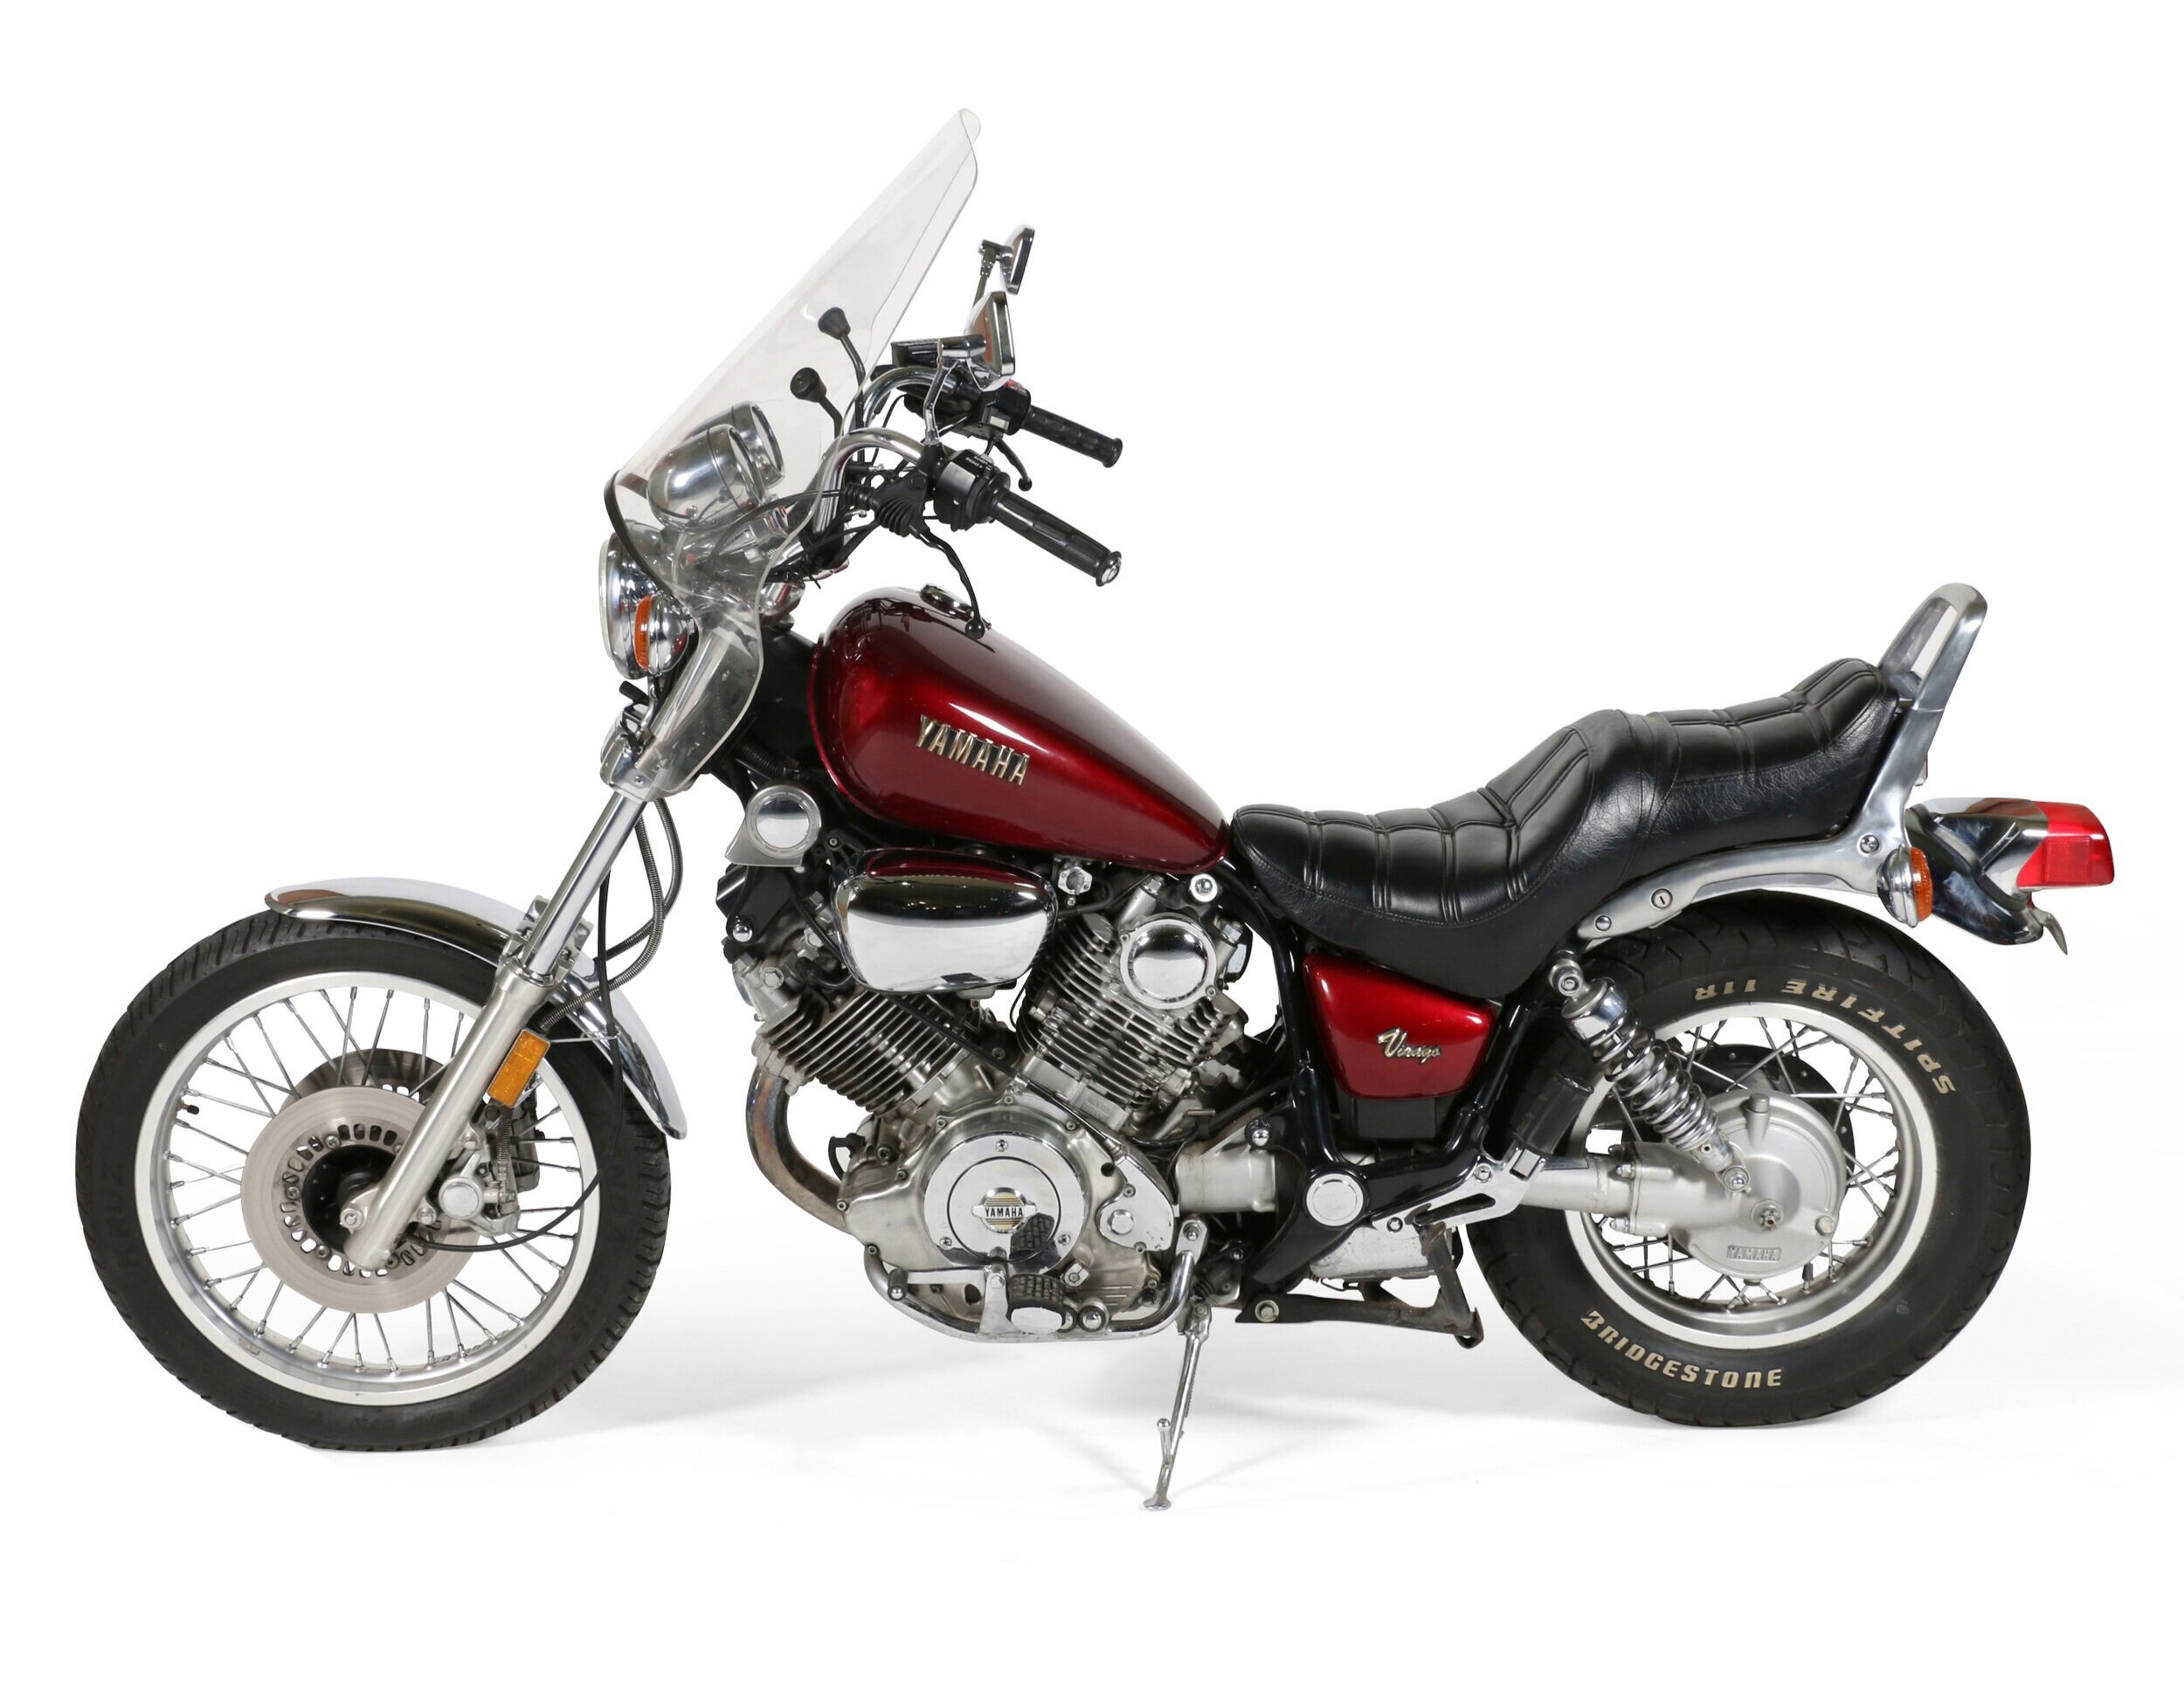 This 1984 Yamaha Virago Is Among A Unique 5 Specialist Jim Danniels Explains Why The Miller Times